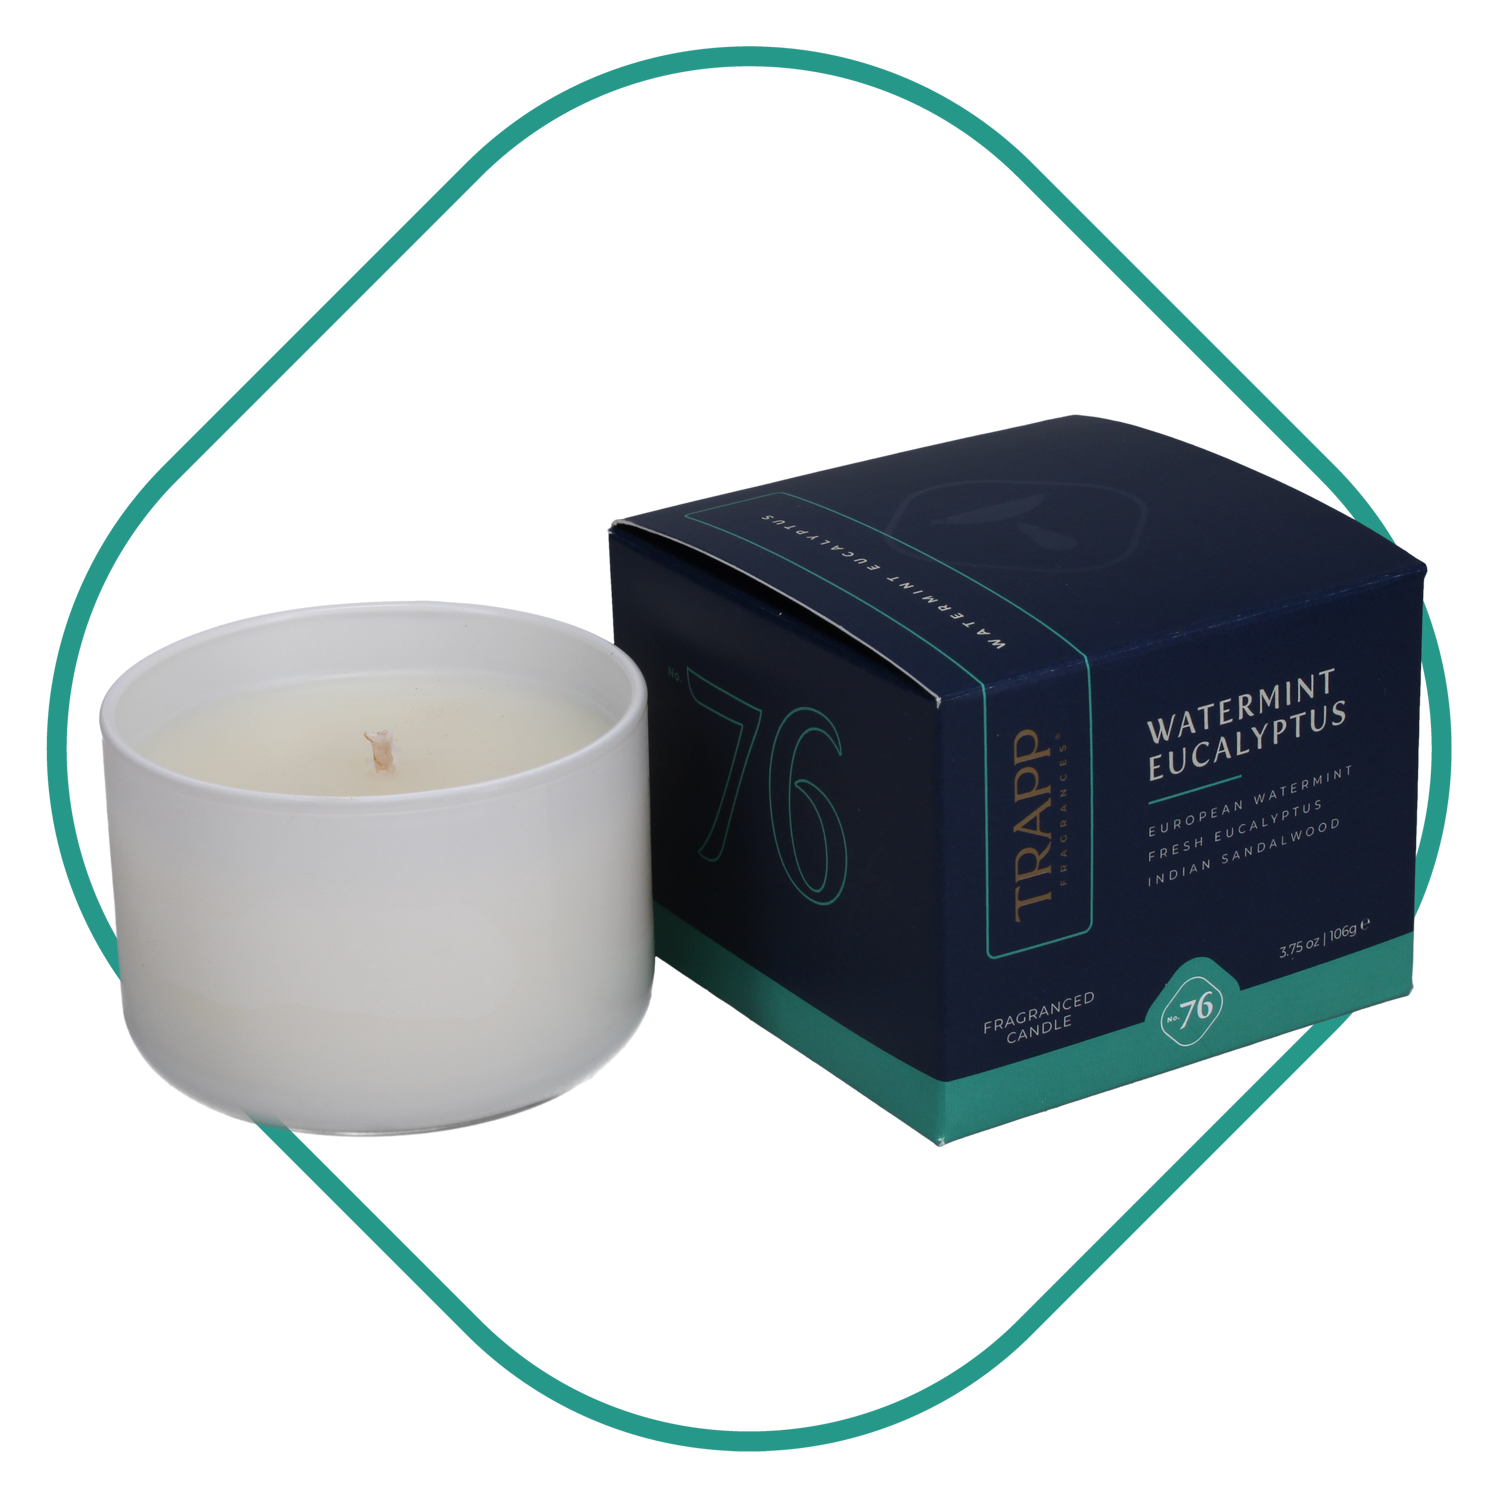 No. 76 Watermint Eucalyptus 3.75 oz. Small Poured Candle